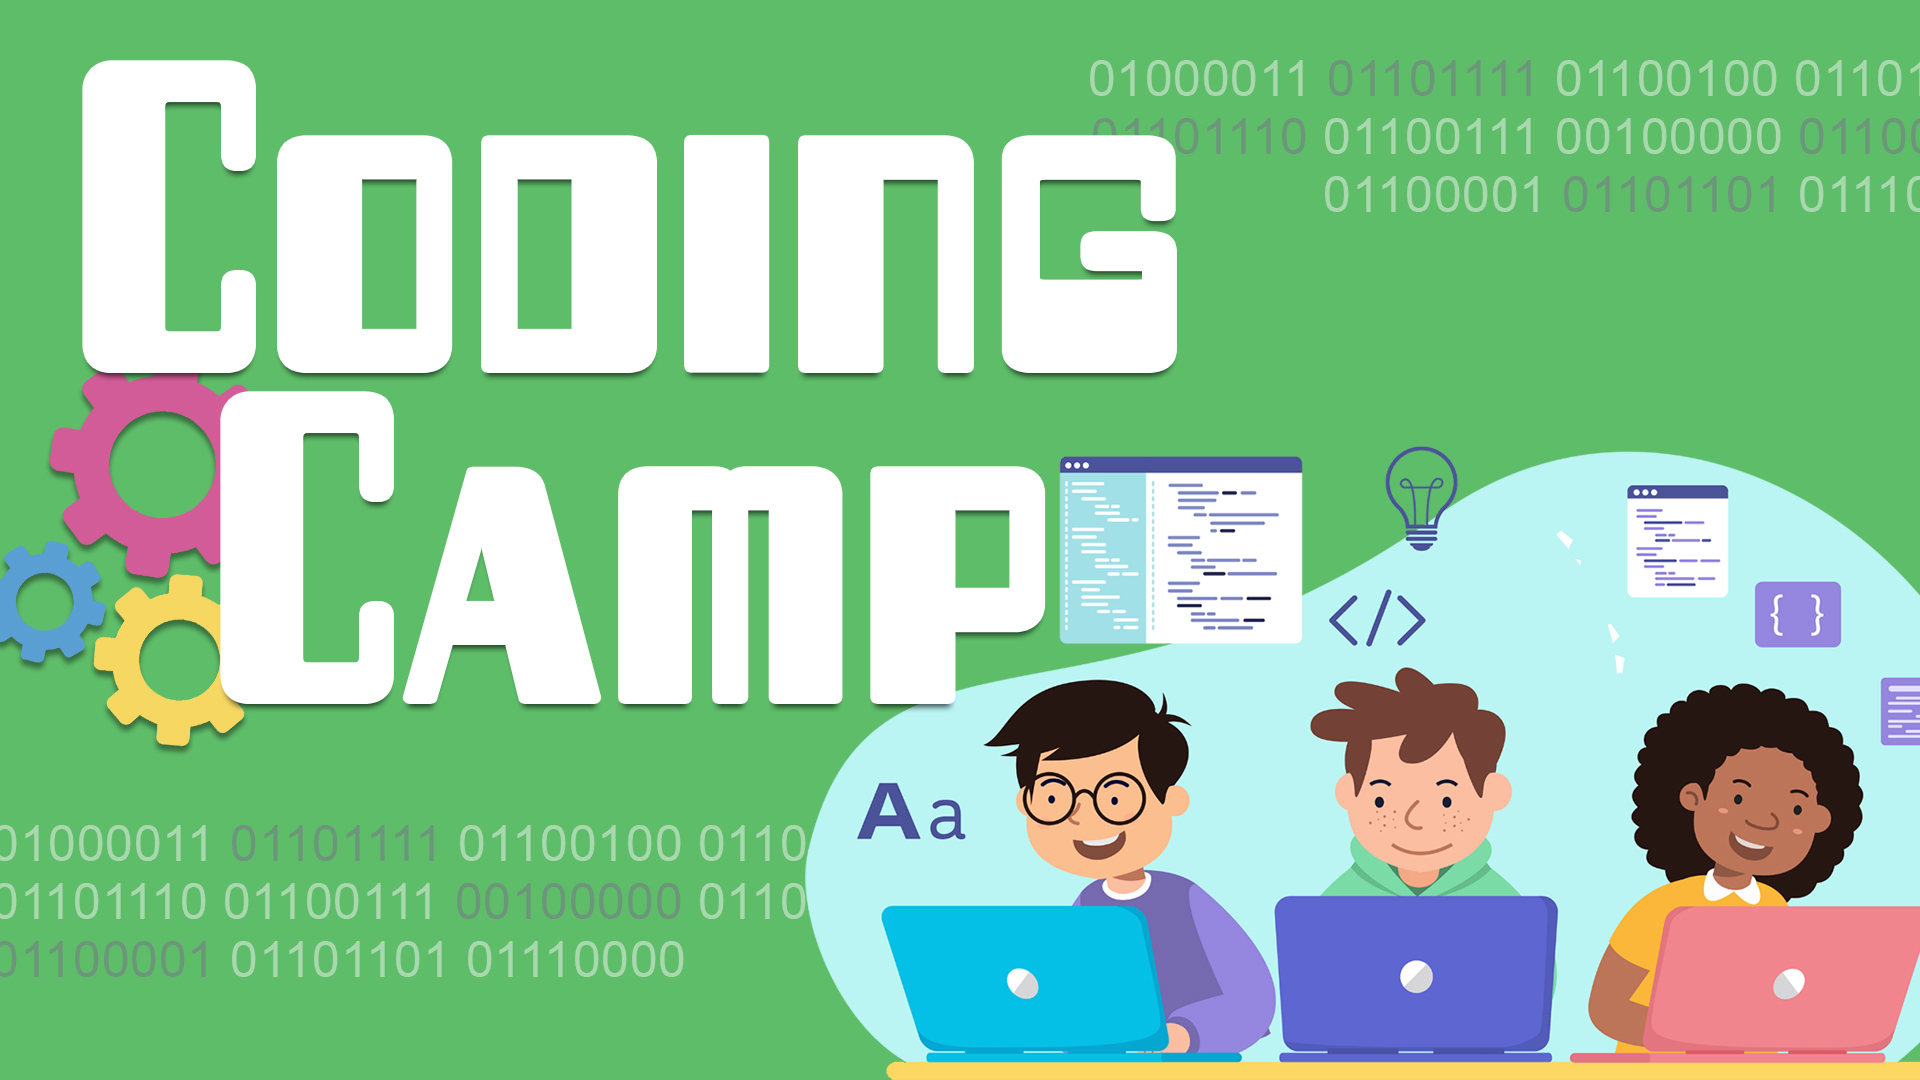 Image reads "Coding Camp" against a green background. To the left of the title are colorful gears. To the bottom right of the title is a graphic of 3 kids on computers with coding elements scattered around them.